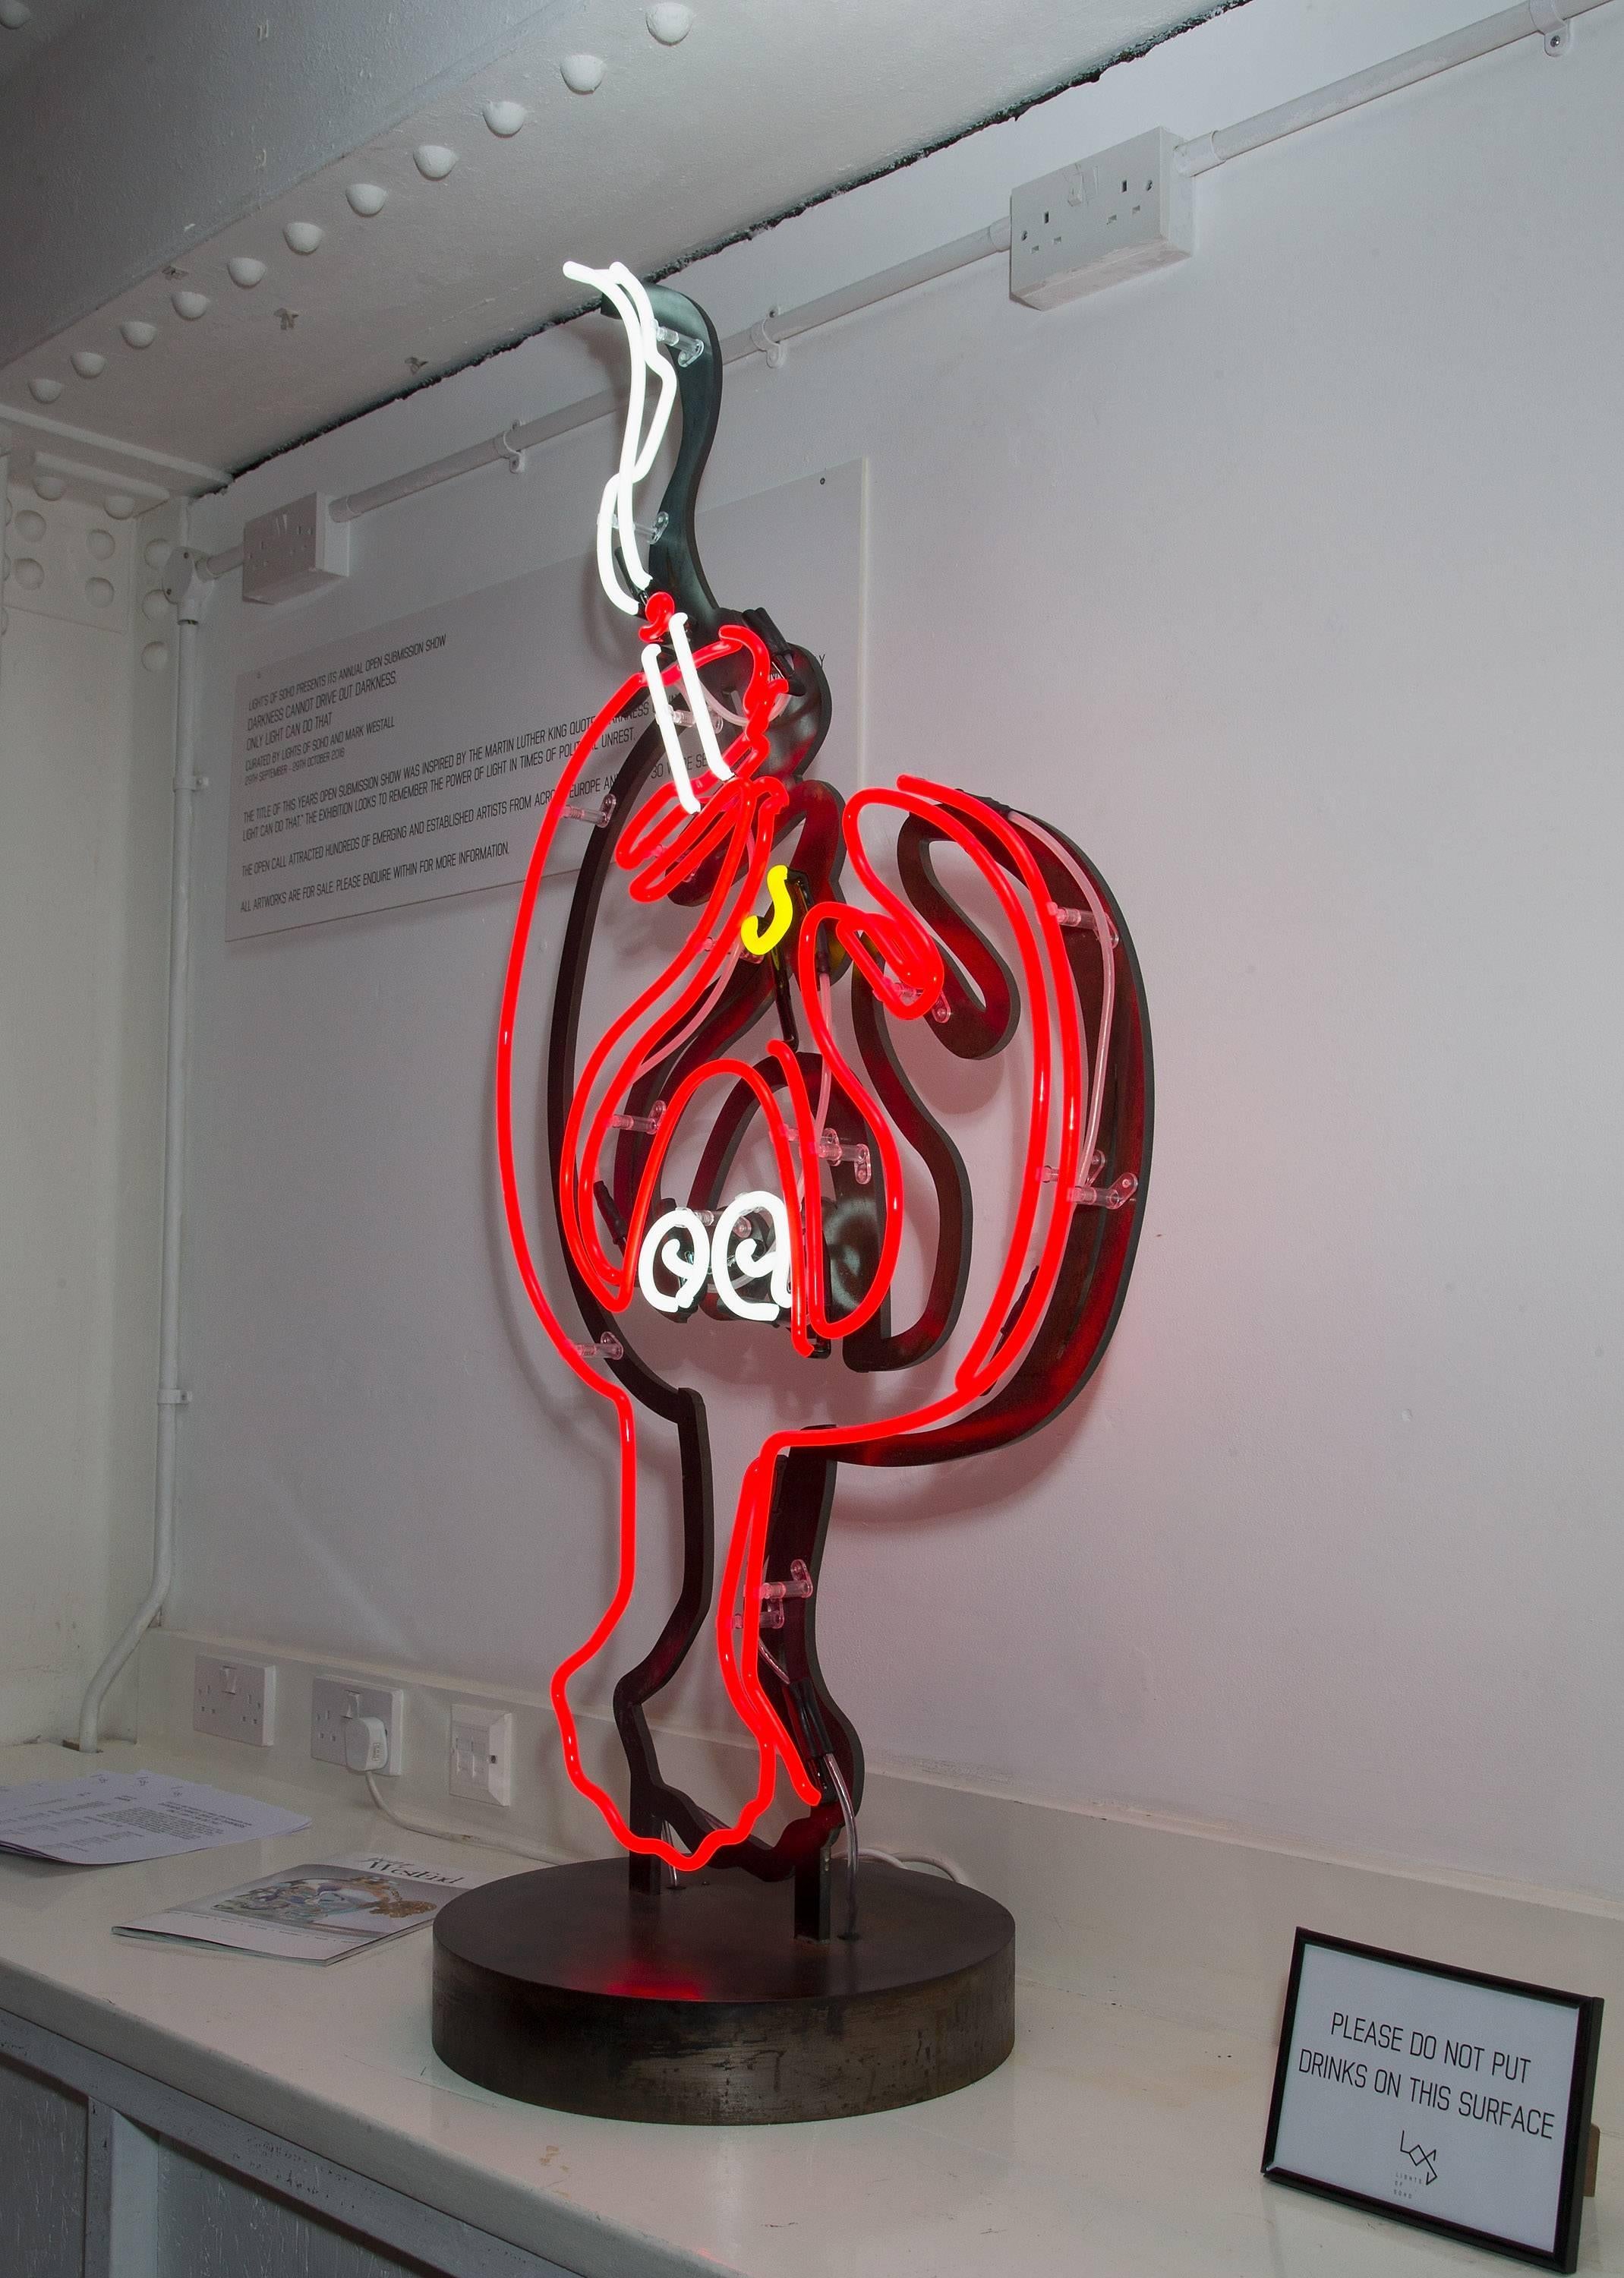 Neon smoking lobster sculpture. 
Philip Colbert. 
Neon on iron work. 
Measures: 86 X 50 cm. 

“Godson of Andy Warhol” Philip Colbert, has created his first series of neons including ‘Neon Lobster’. Philip is a renowned artist and fashion